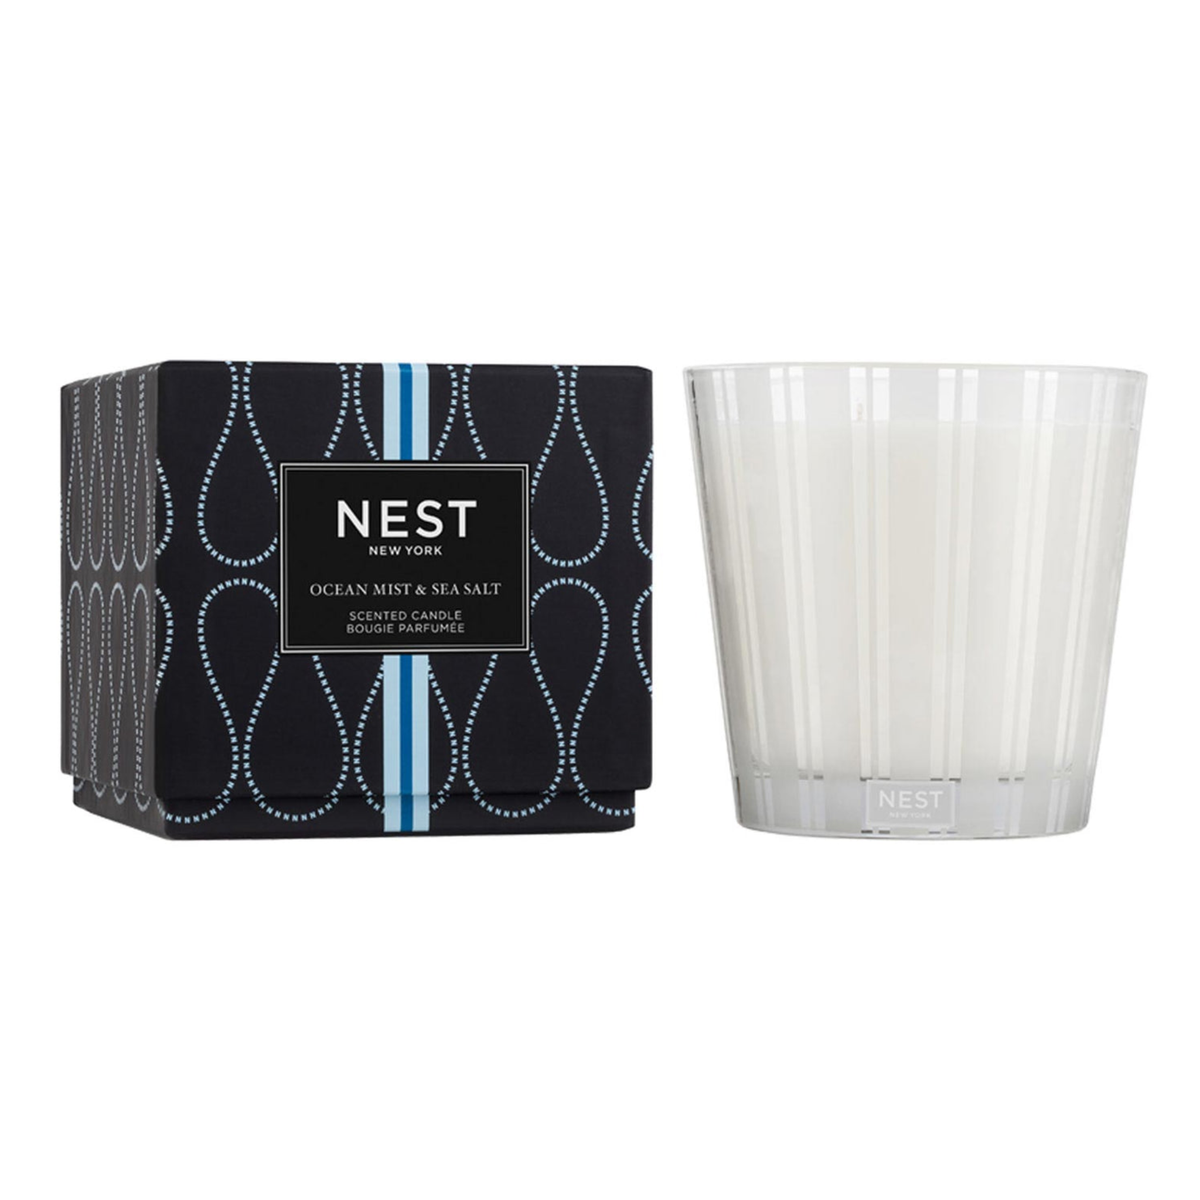 Product Image of Nest New York’s Ocean Mist &amp; Sea Salt 3-Wick Candle with Box